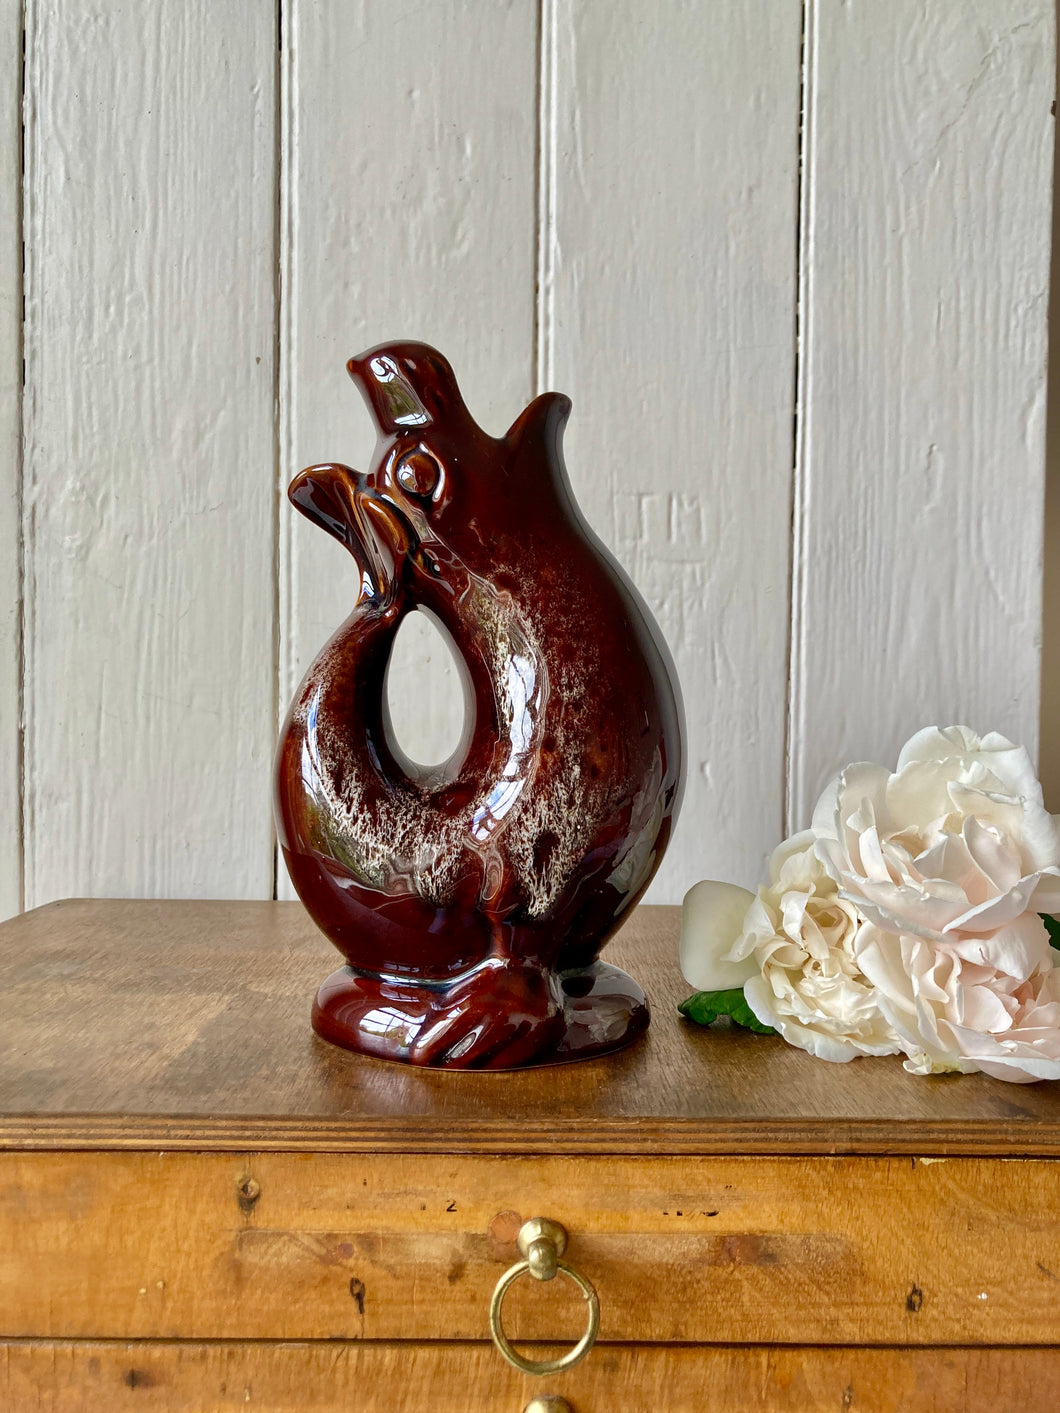 A characterful Seal gluggle jug or vase